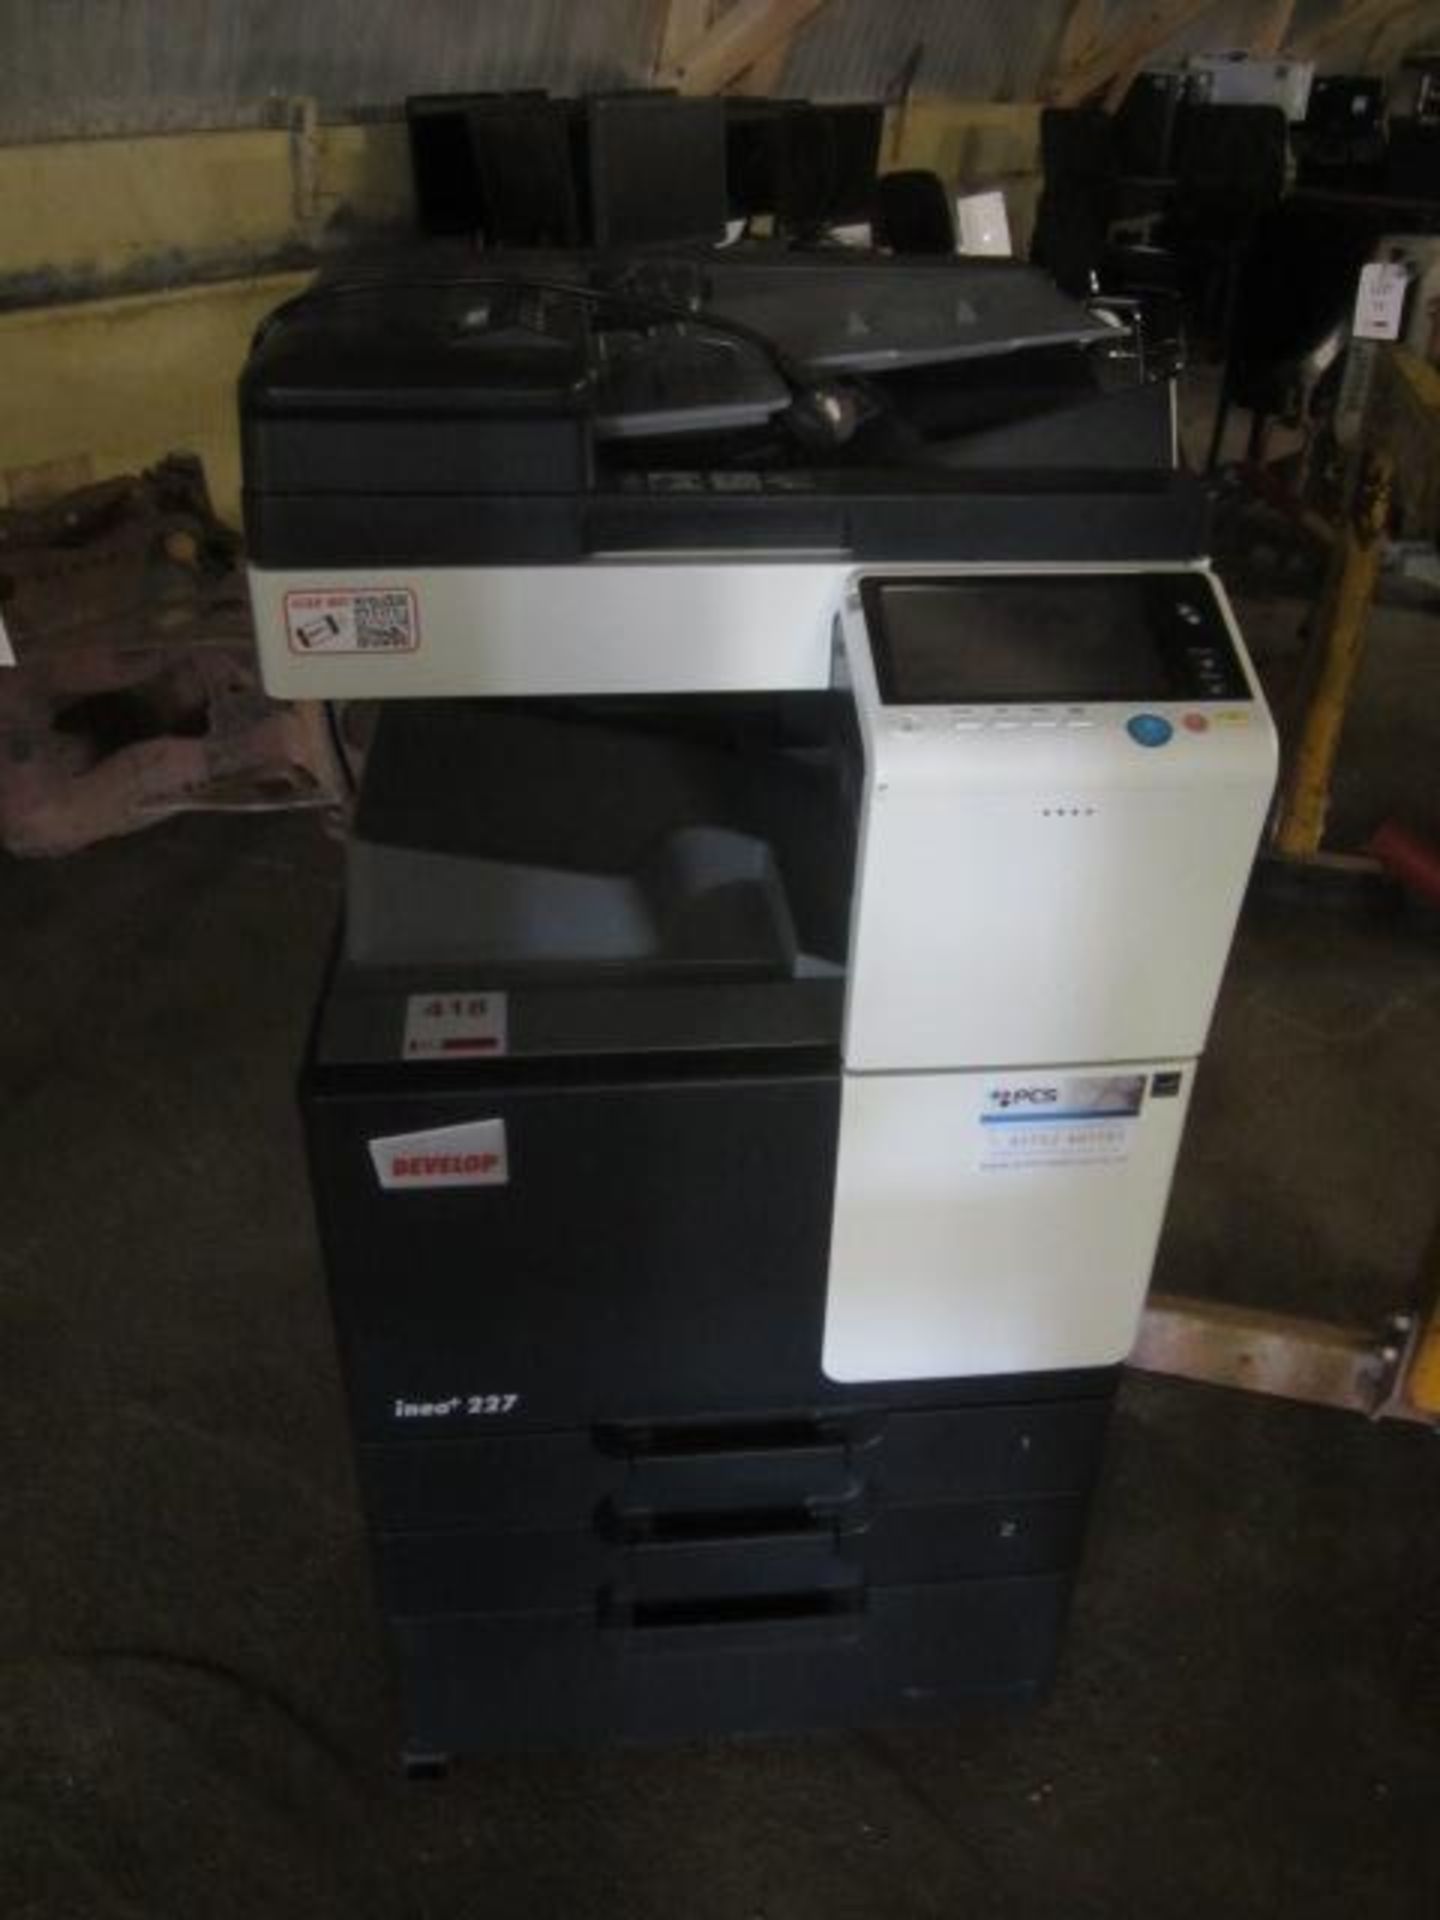 Ineo+ 227 photocopier, model C302200, s/n: A79812100588,** Located at Stoneford Farm, Steamalong - Image 2 of 3